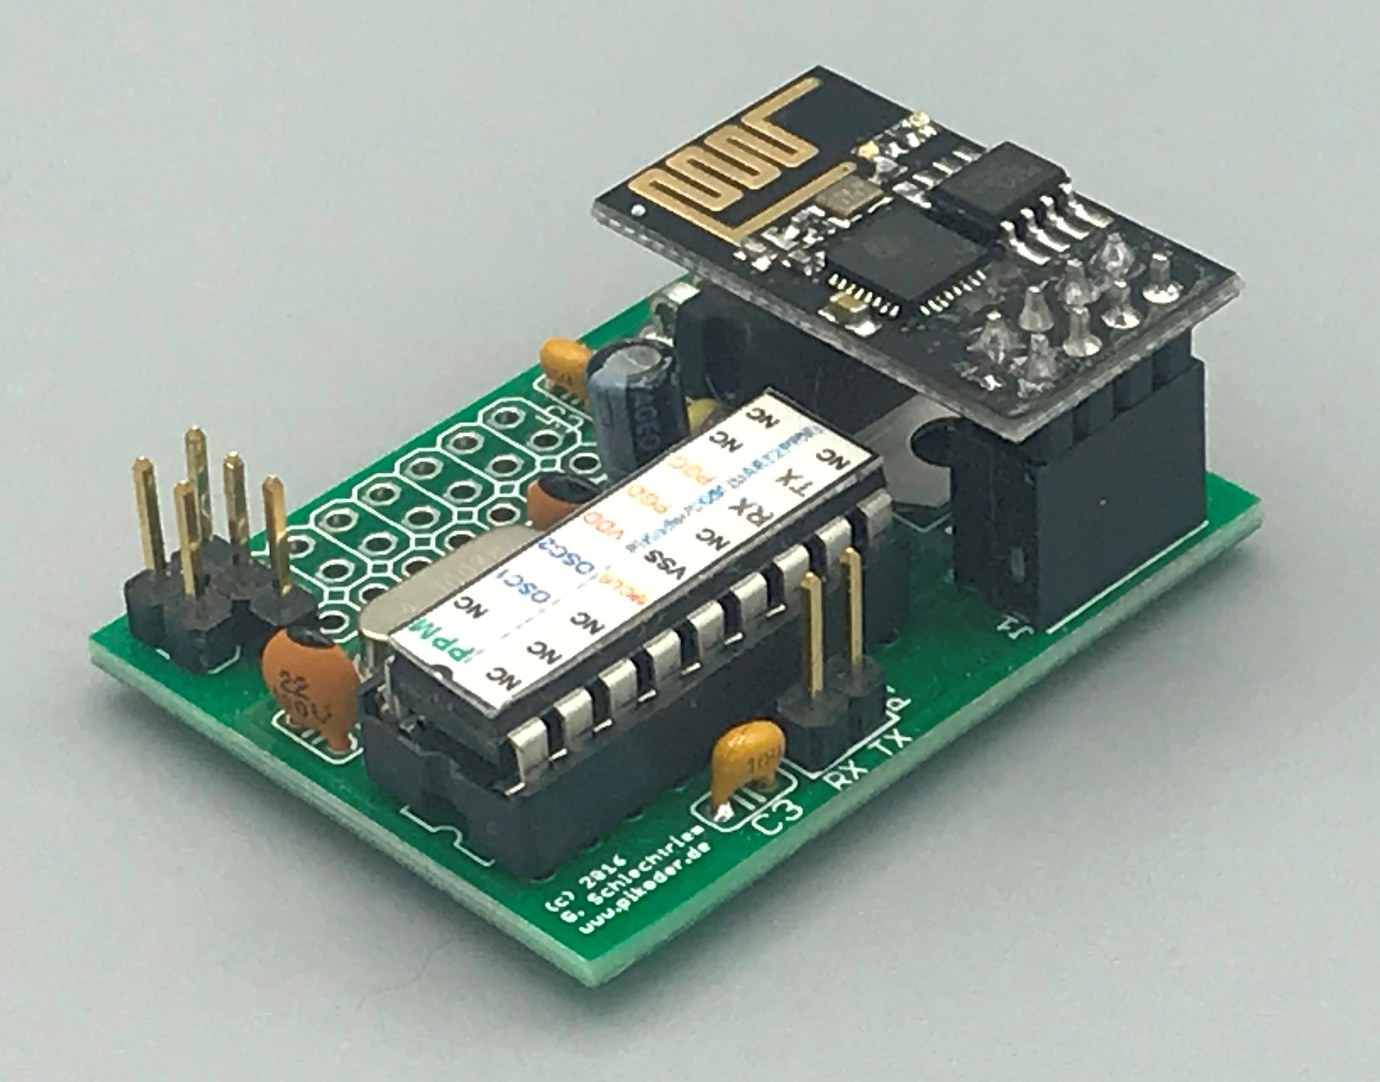 PiKoder/PPM wRX: PiKoder/PPM WLAN R/C receiver with PPM Output